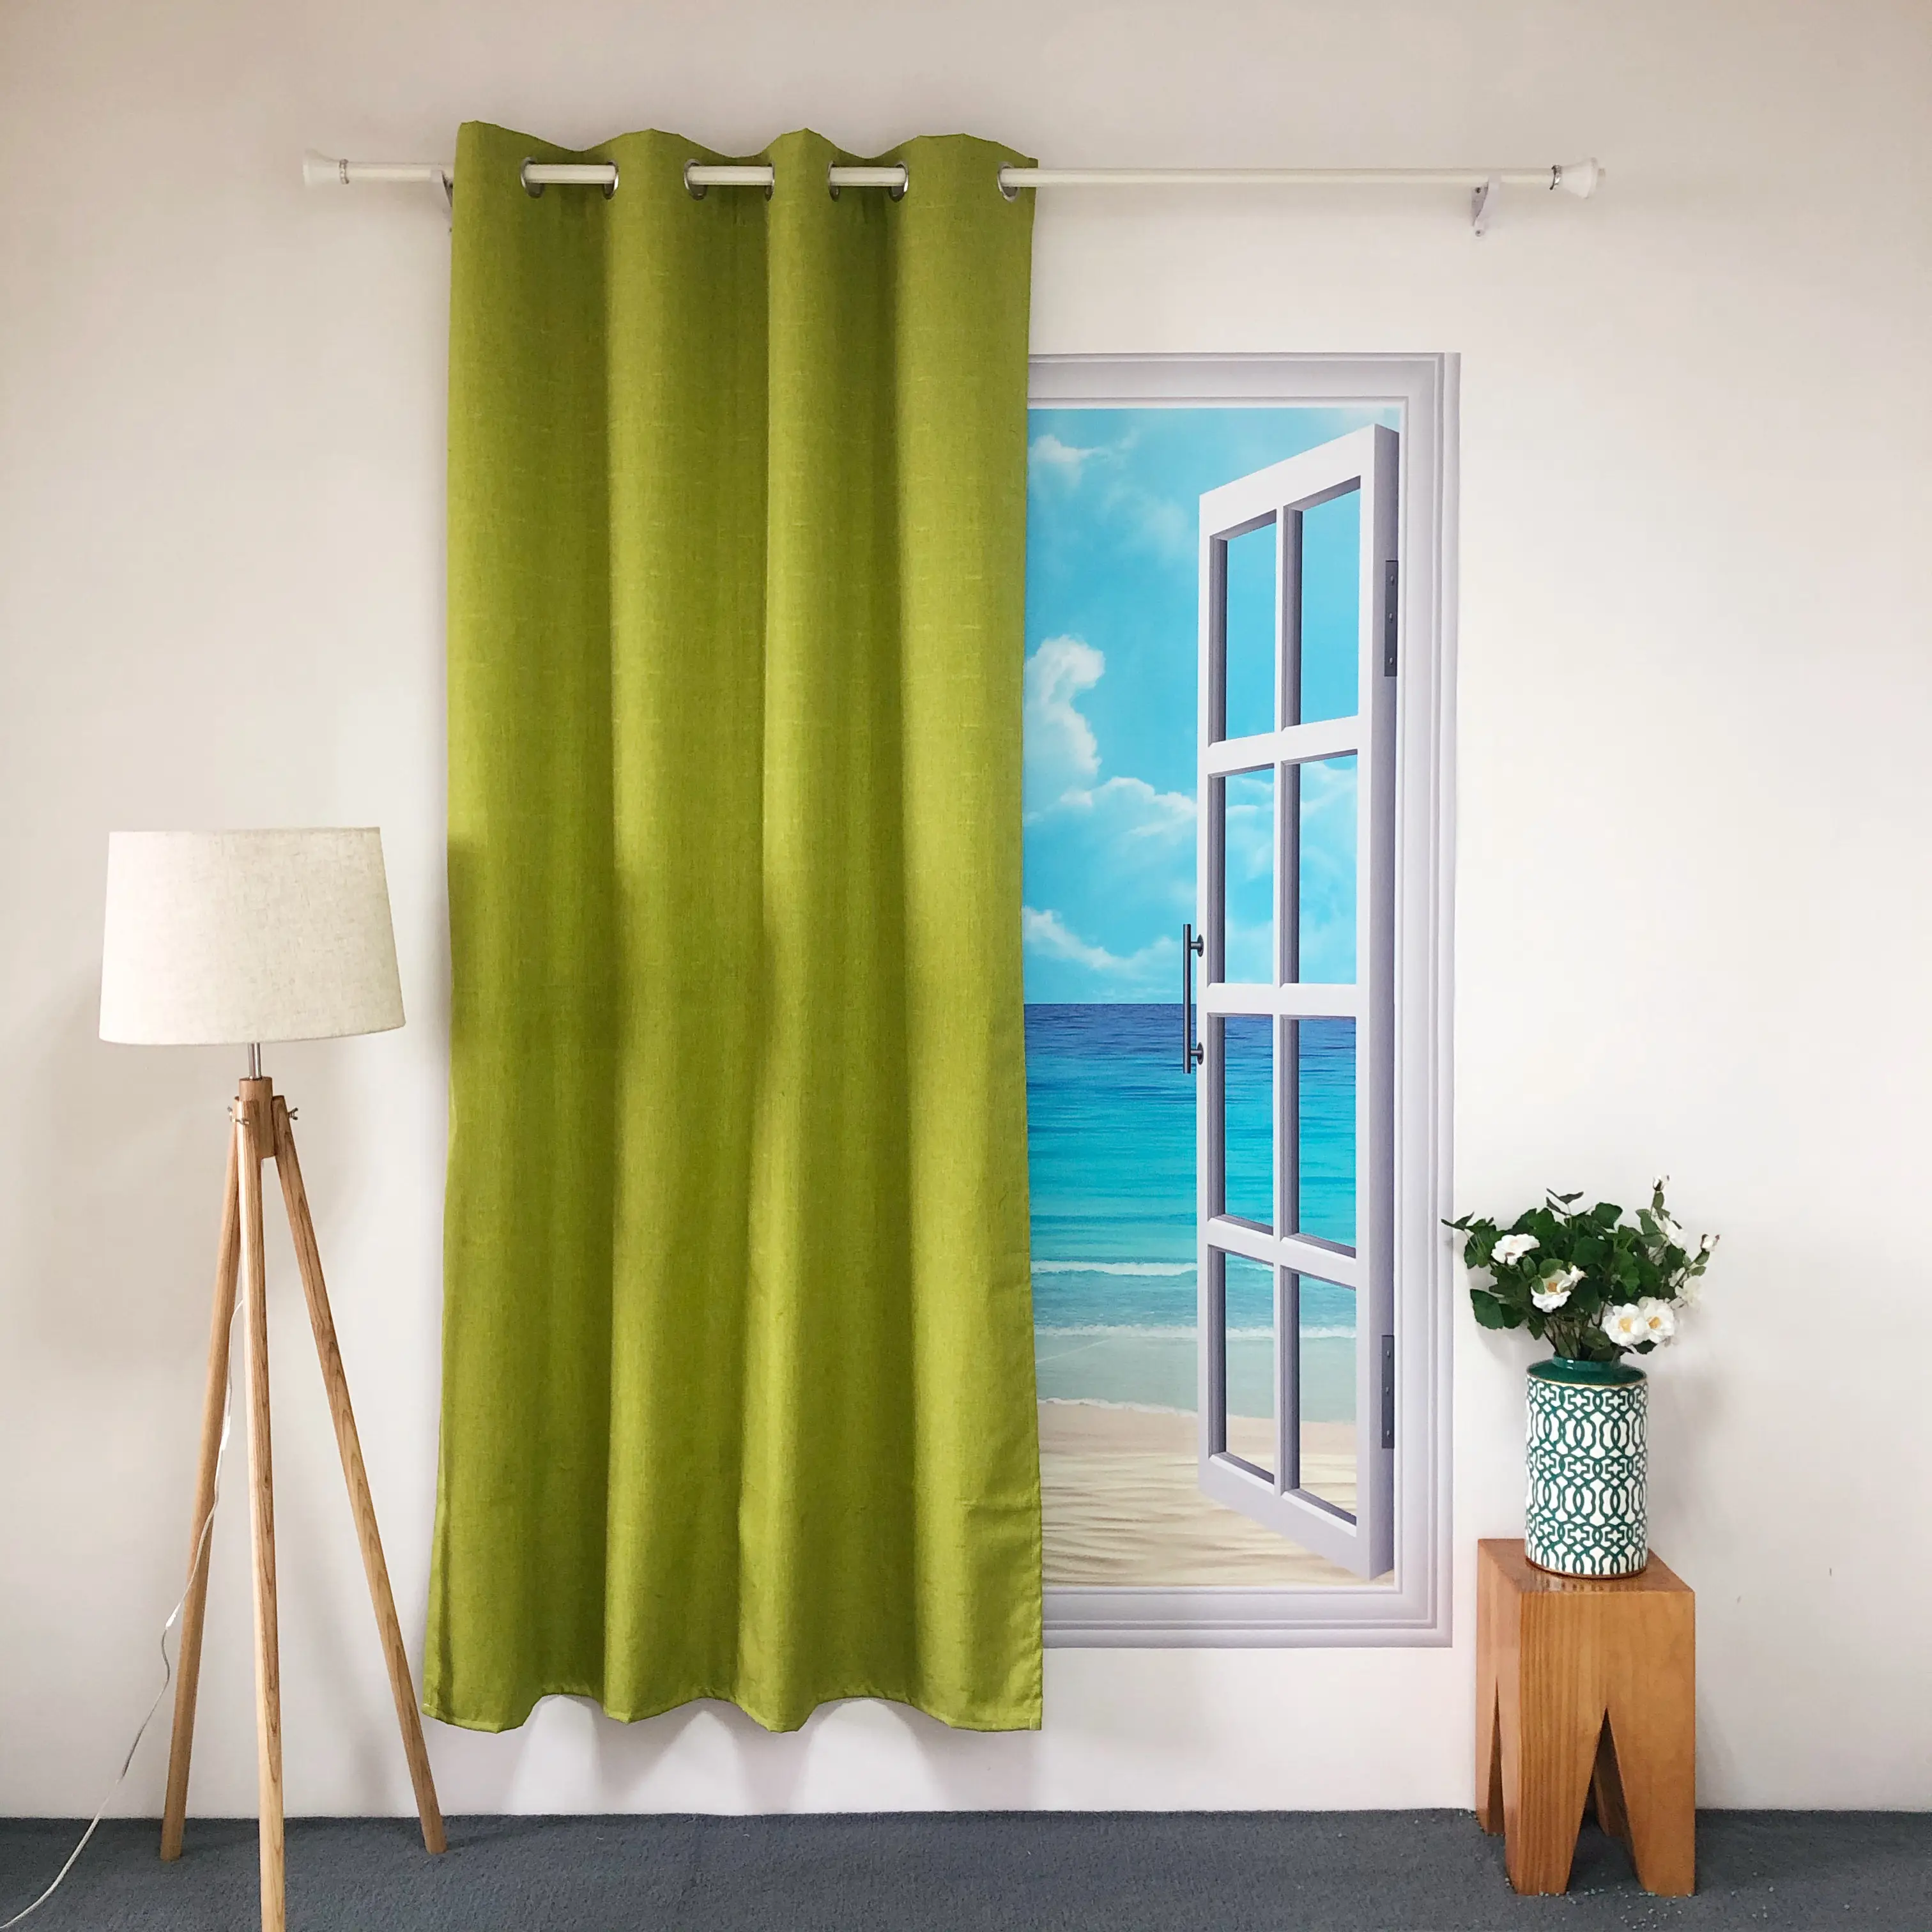 Green curtains Blackout